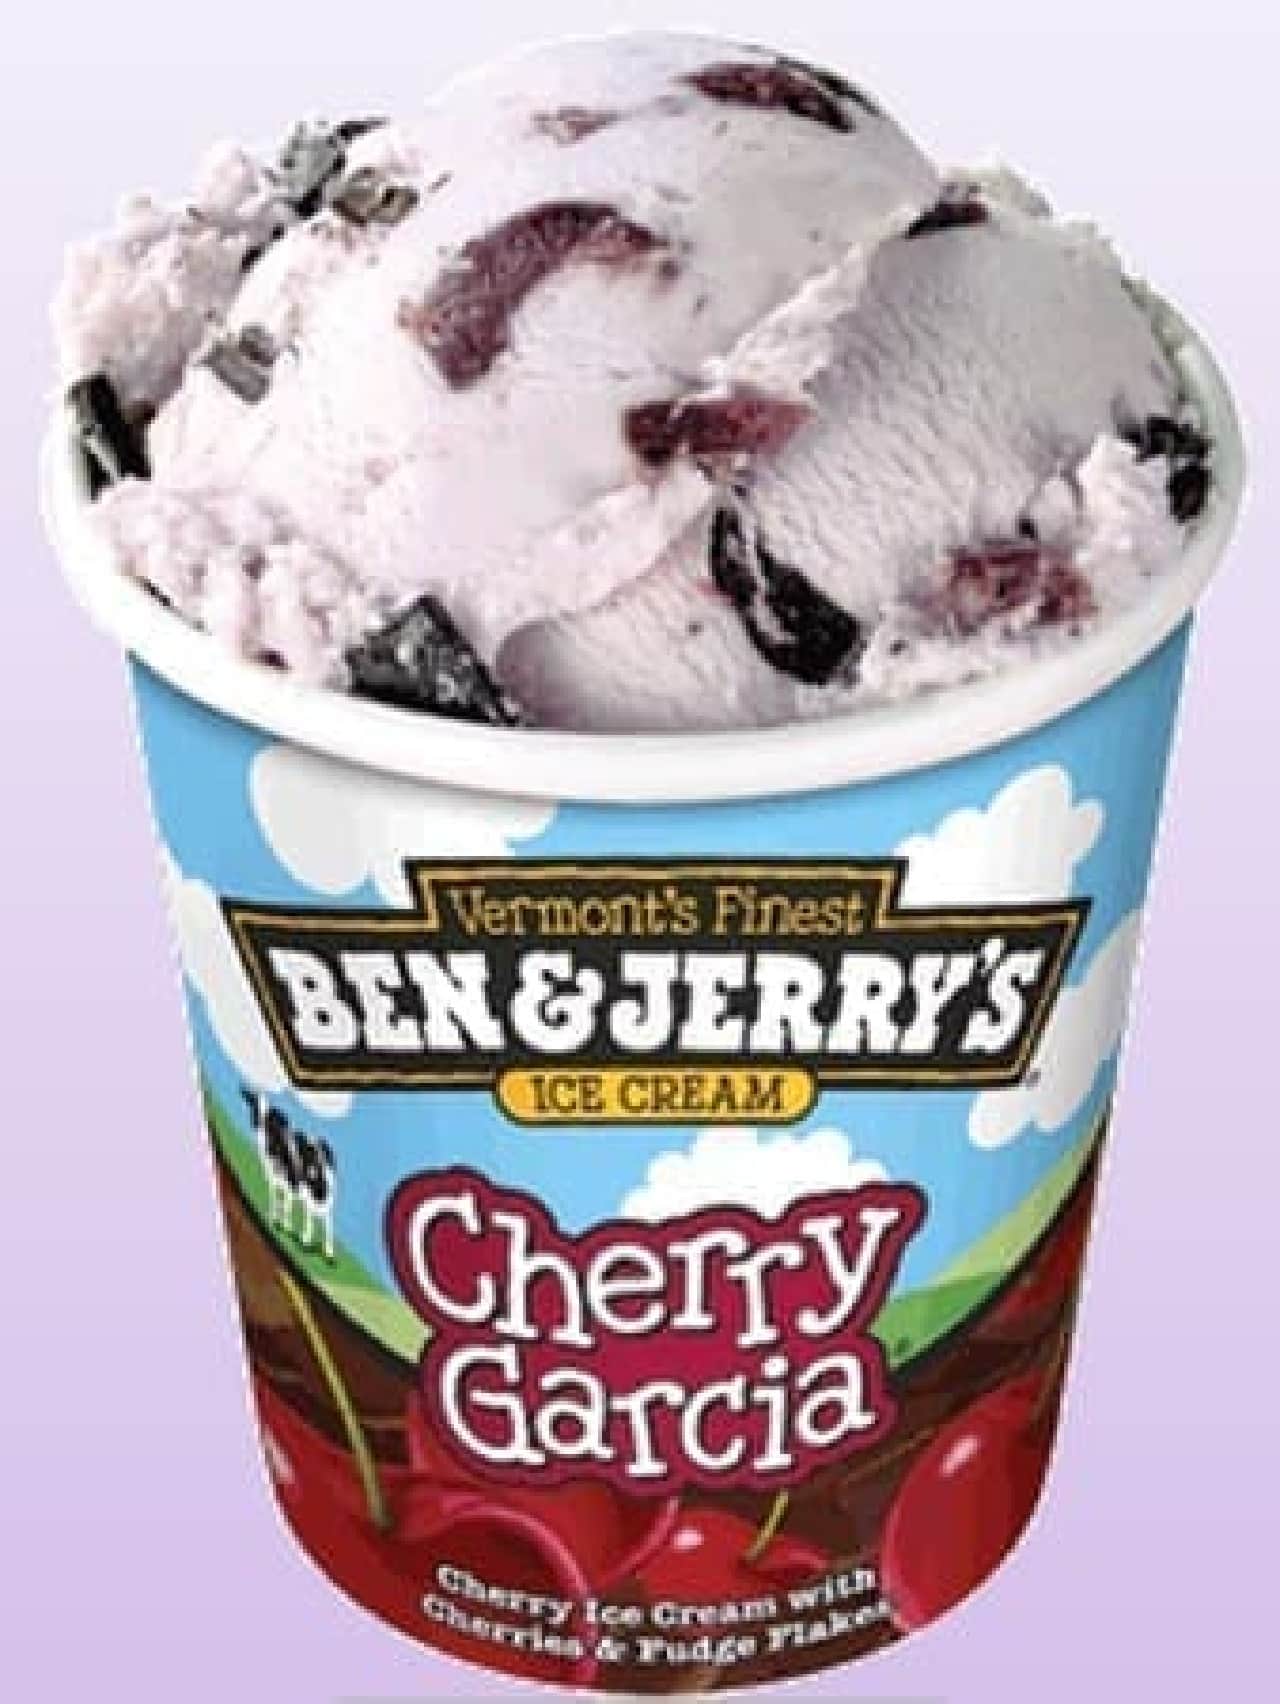 Cherry Garcia, one of the flavors inside